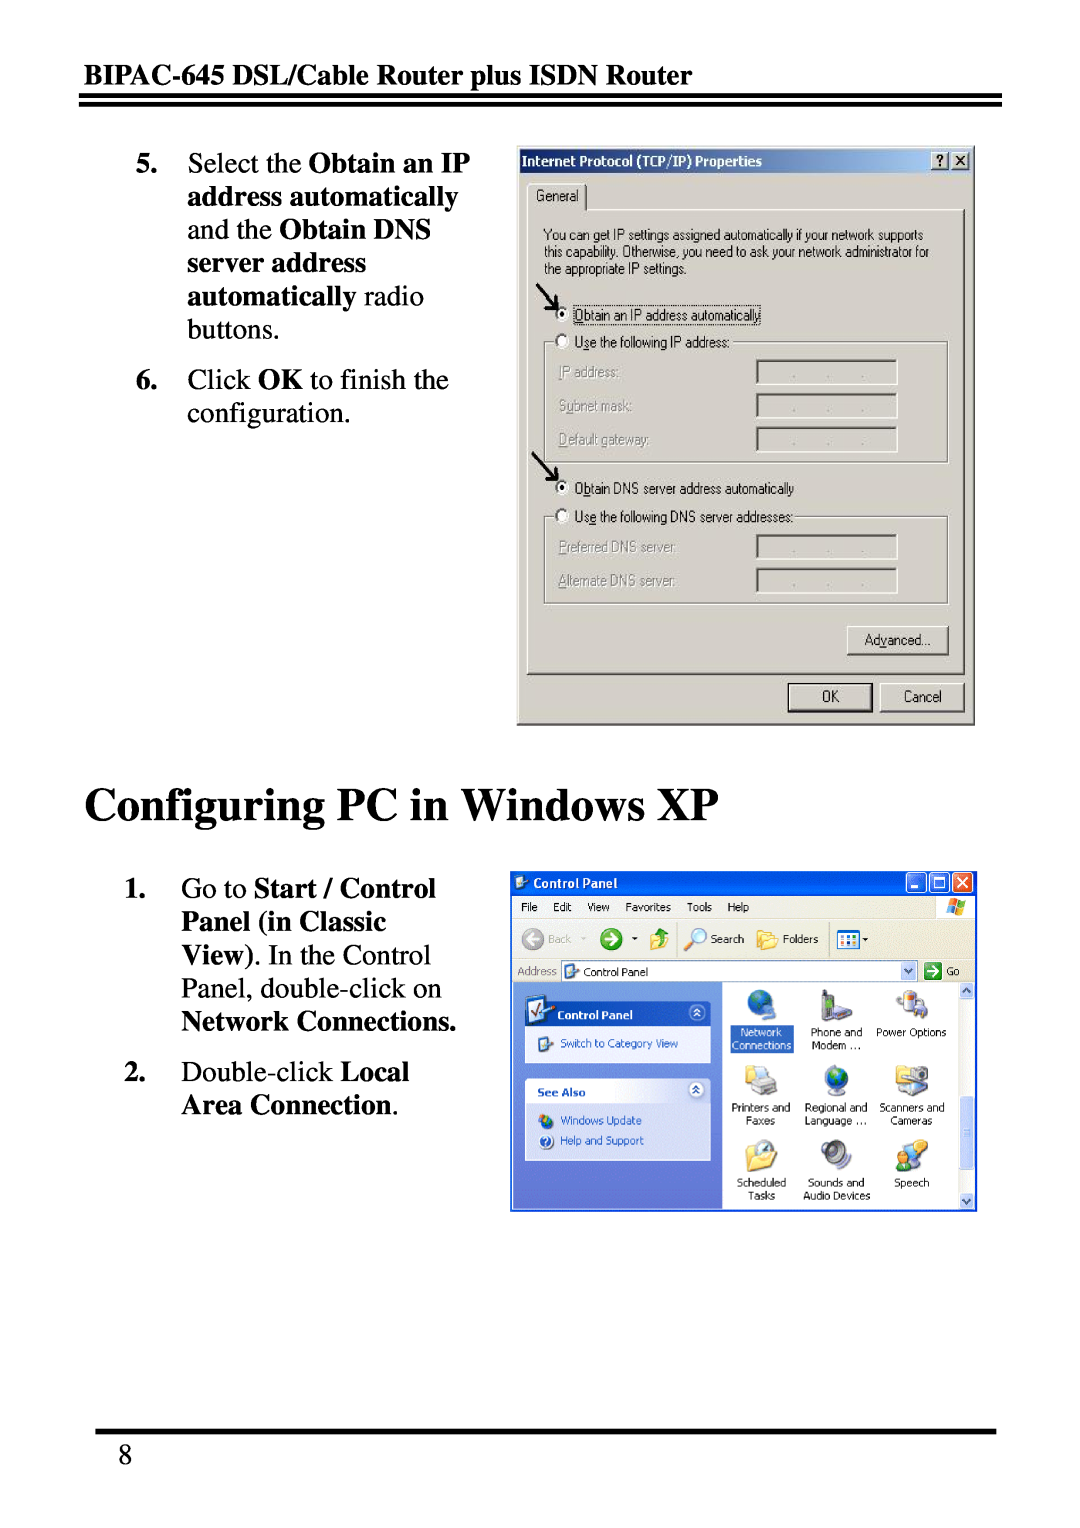 Billion Electric Company BIPAC-645 quick start Configuring PC in Windows XP, Go to Start / Control, Network Connections 